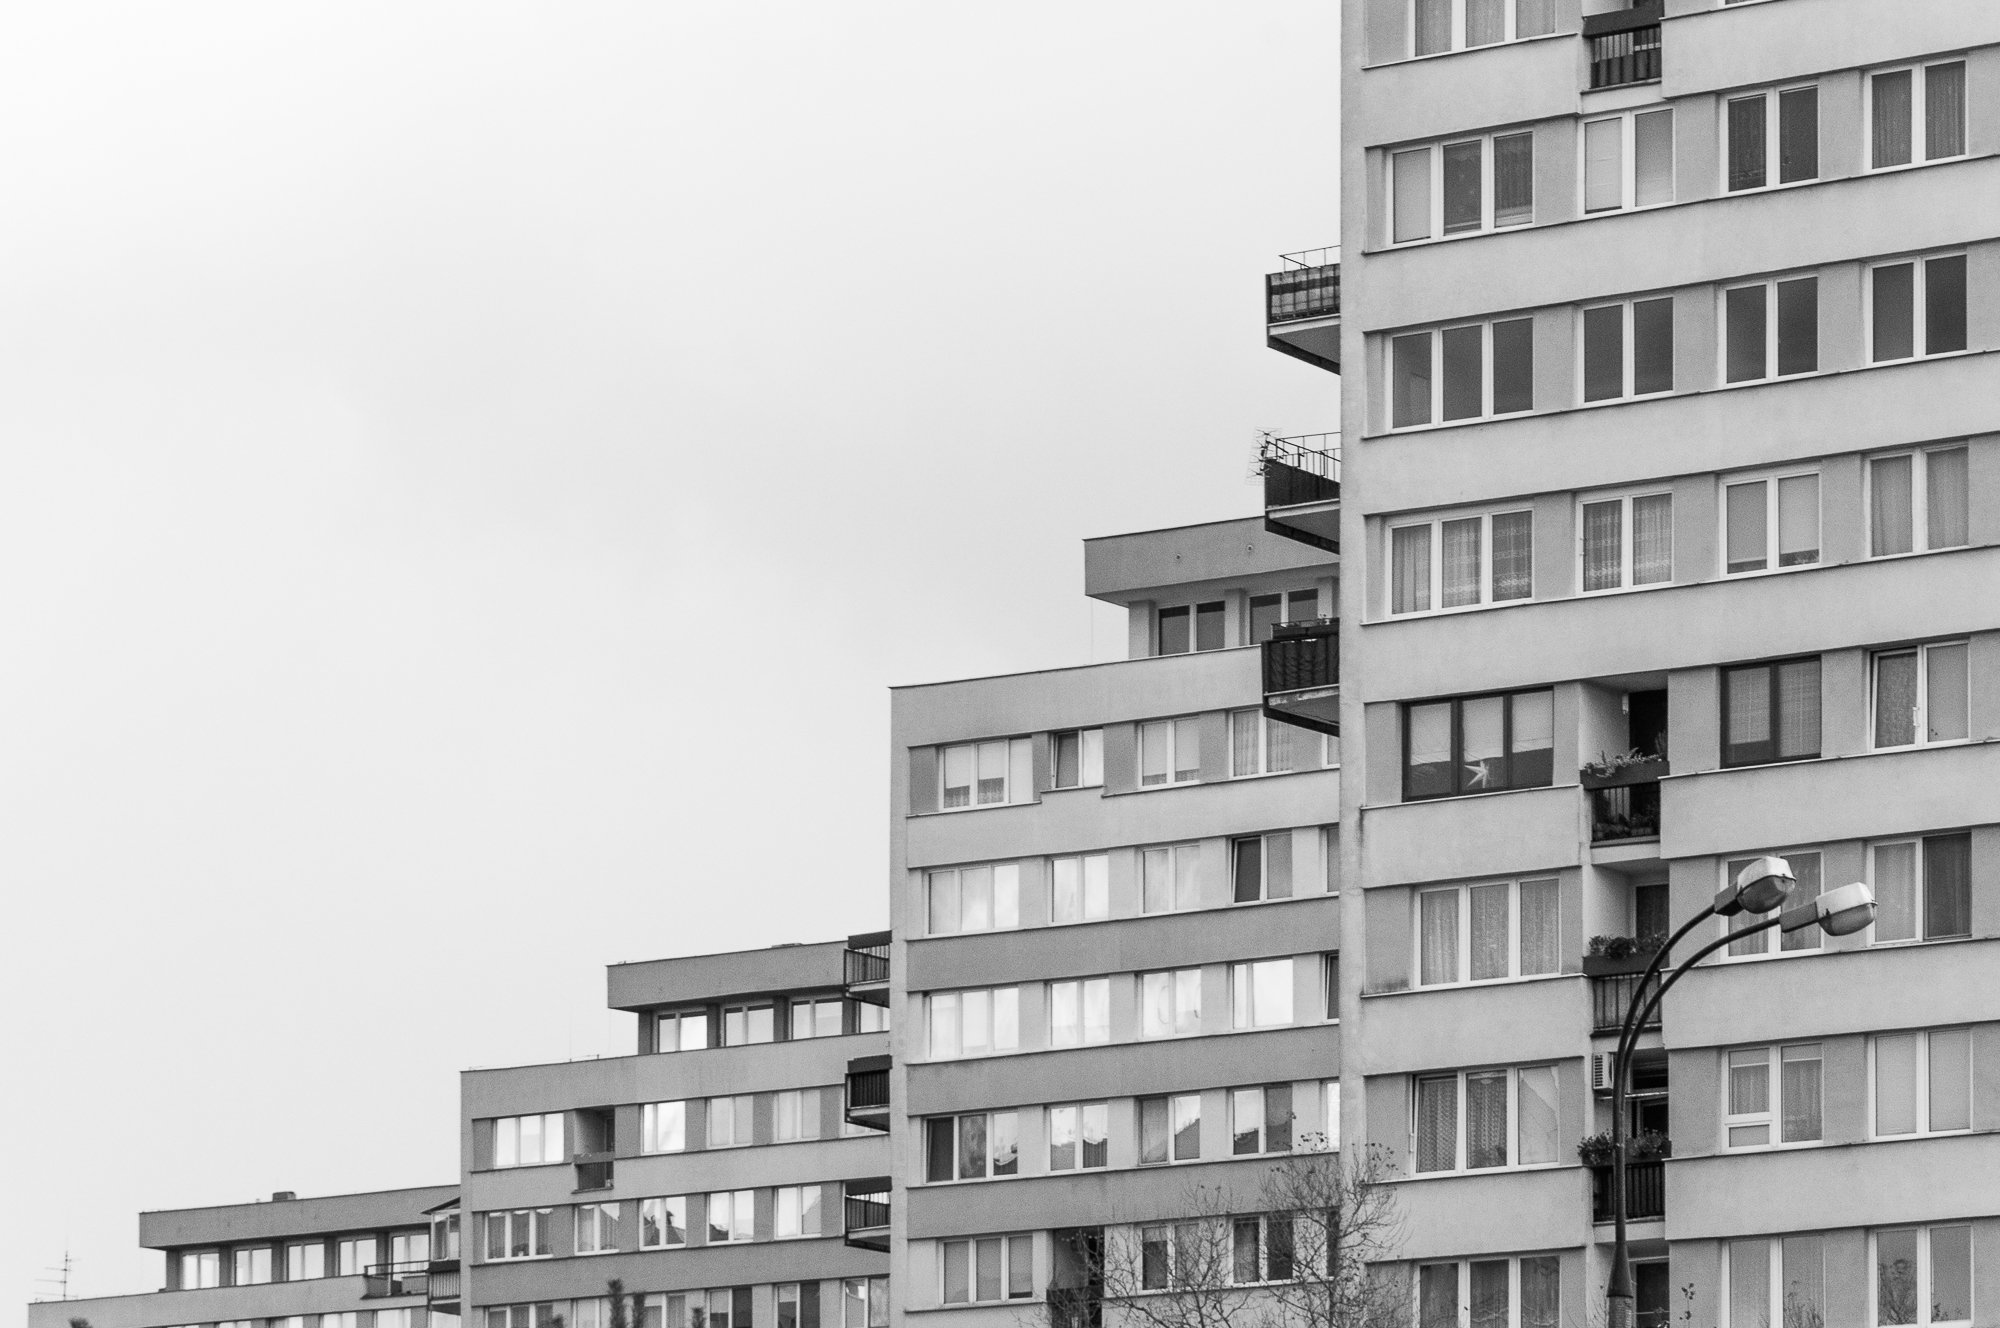 Adam Mazek Photography Warsaw 2018. Productivity in photography. Perspective. Block of flats.